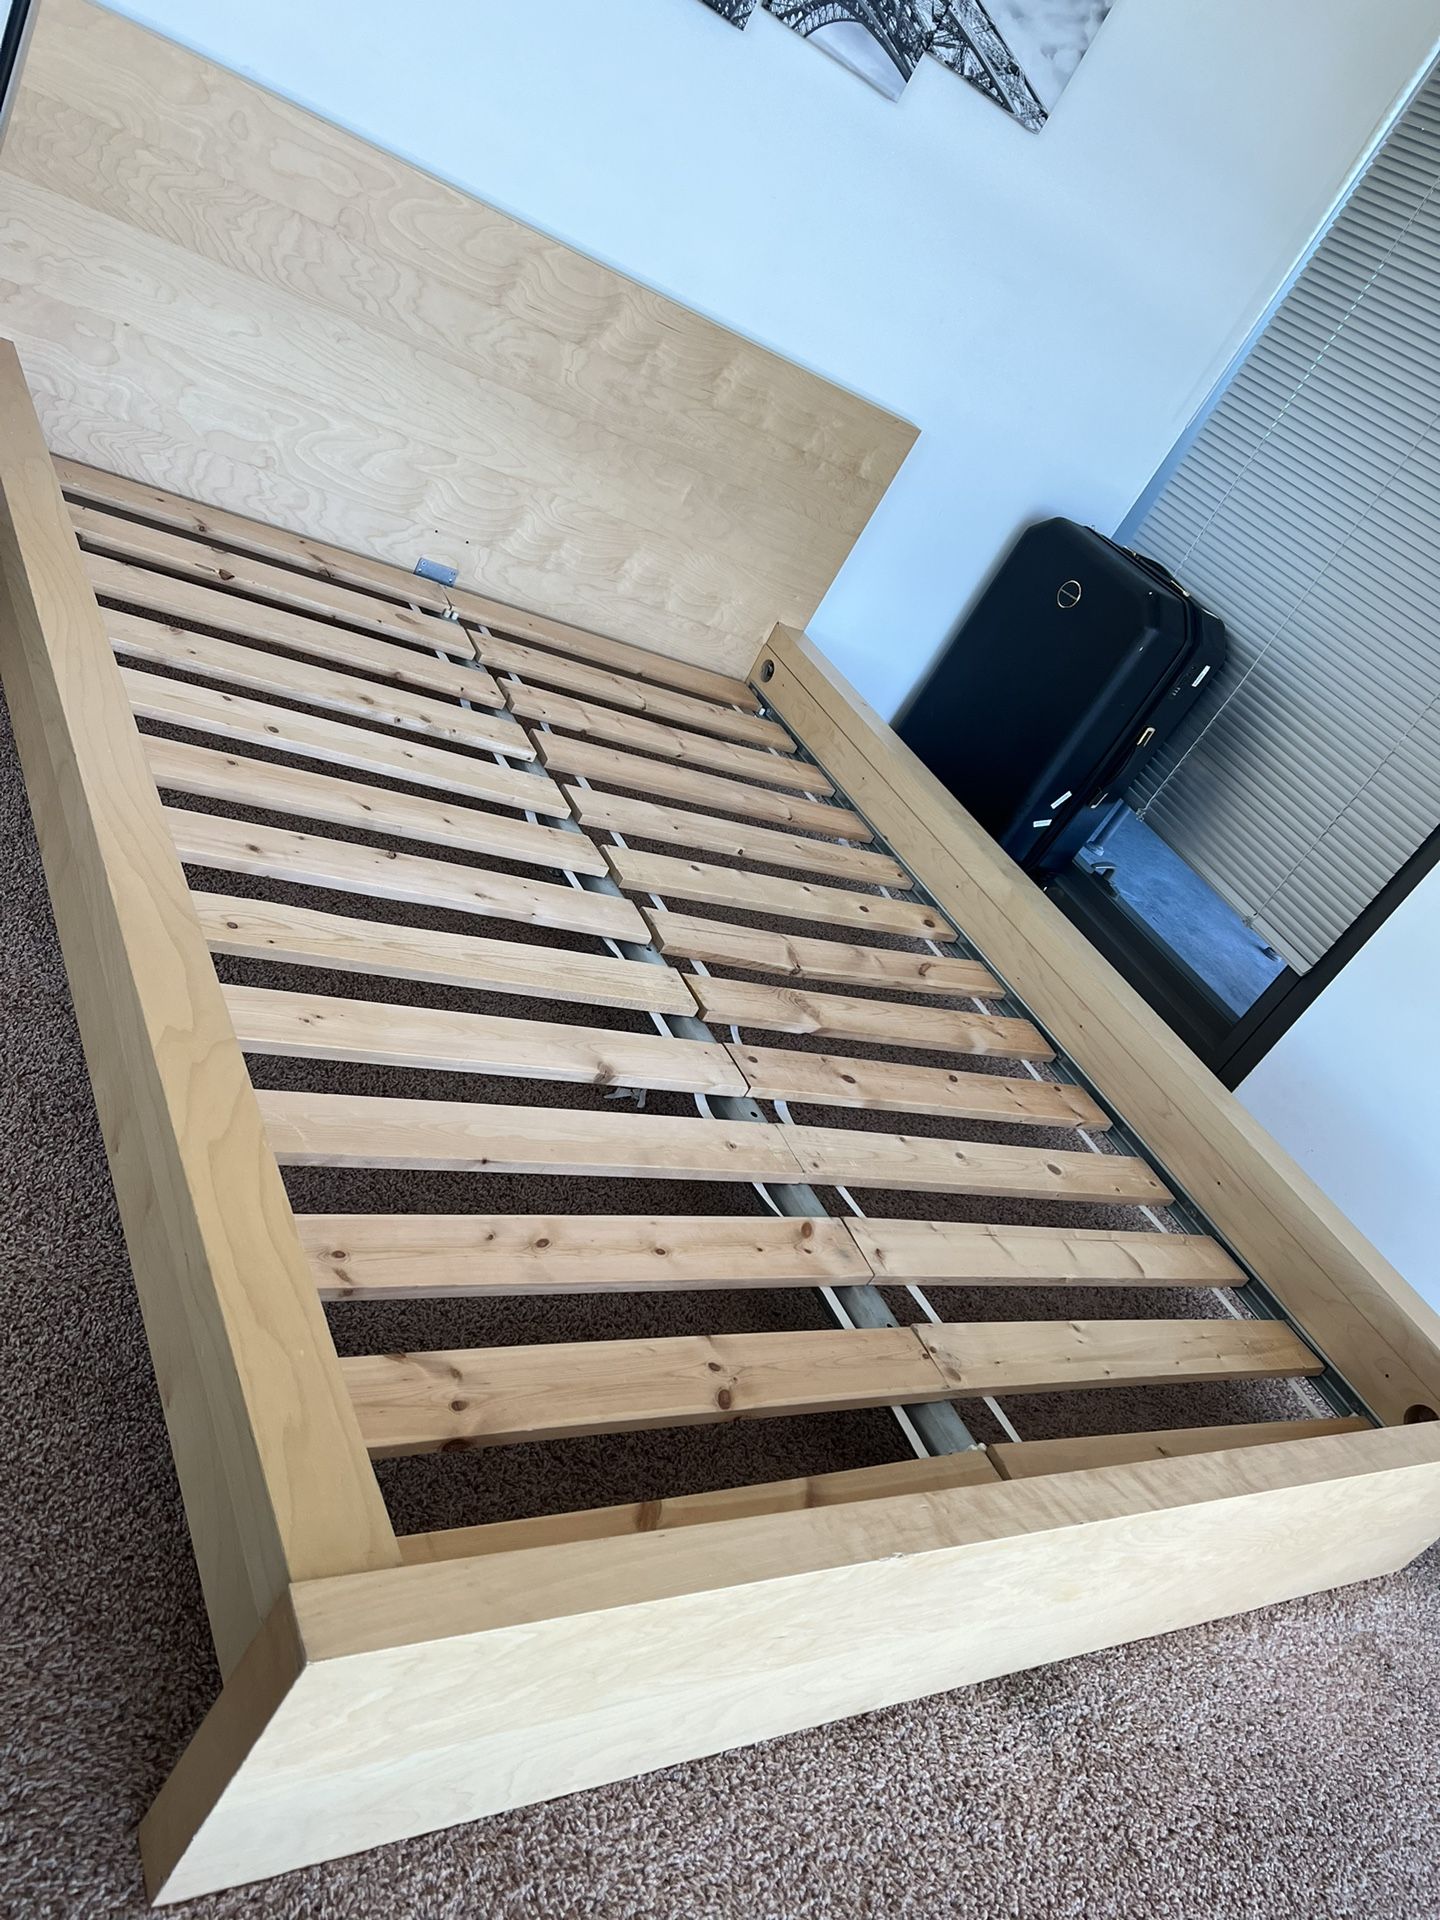 FREE QUEEN BED FRAME